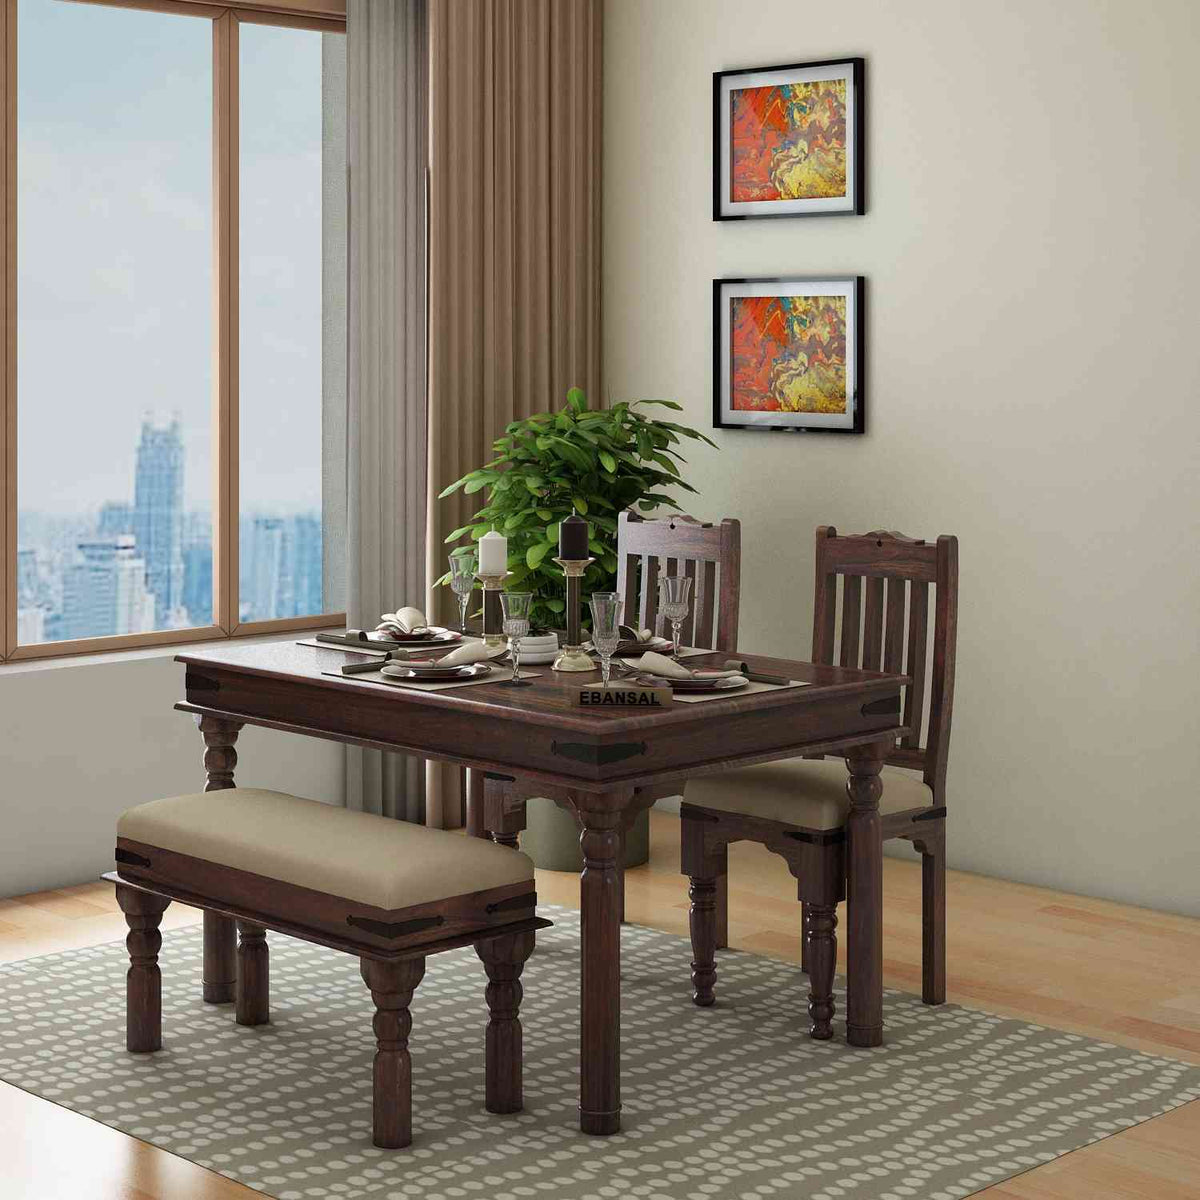 Ajmer Solid Sheesham Wood 4 Seater Dining Set With Bench (With Cushion, Walnut Finish)